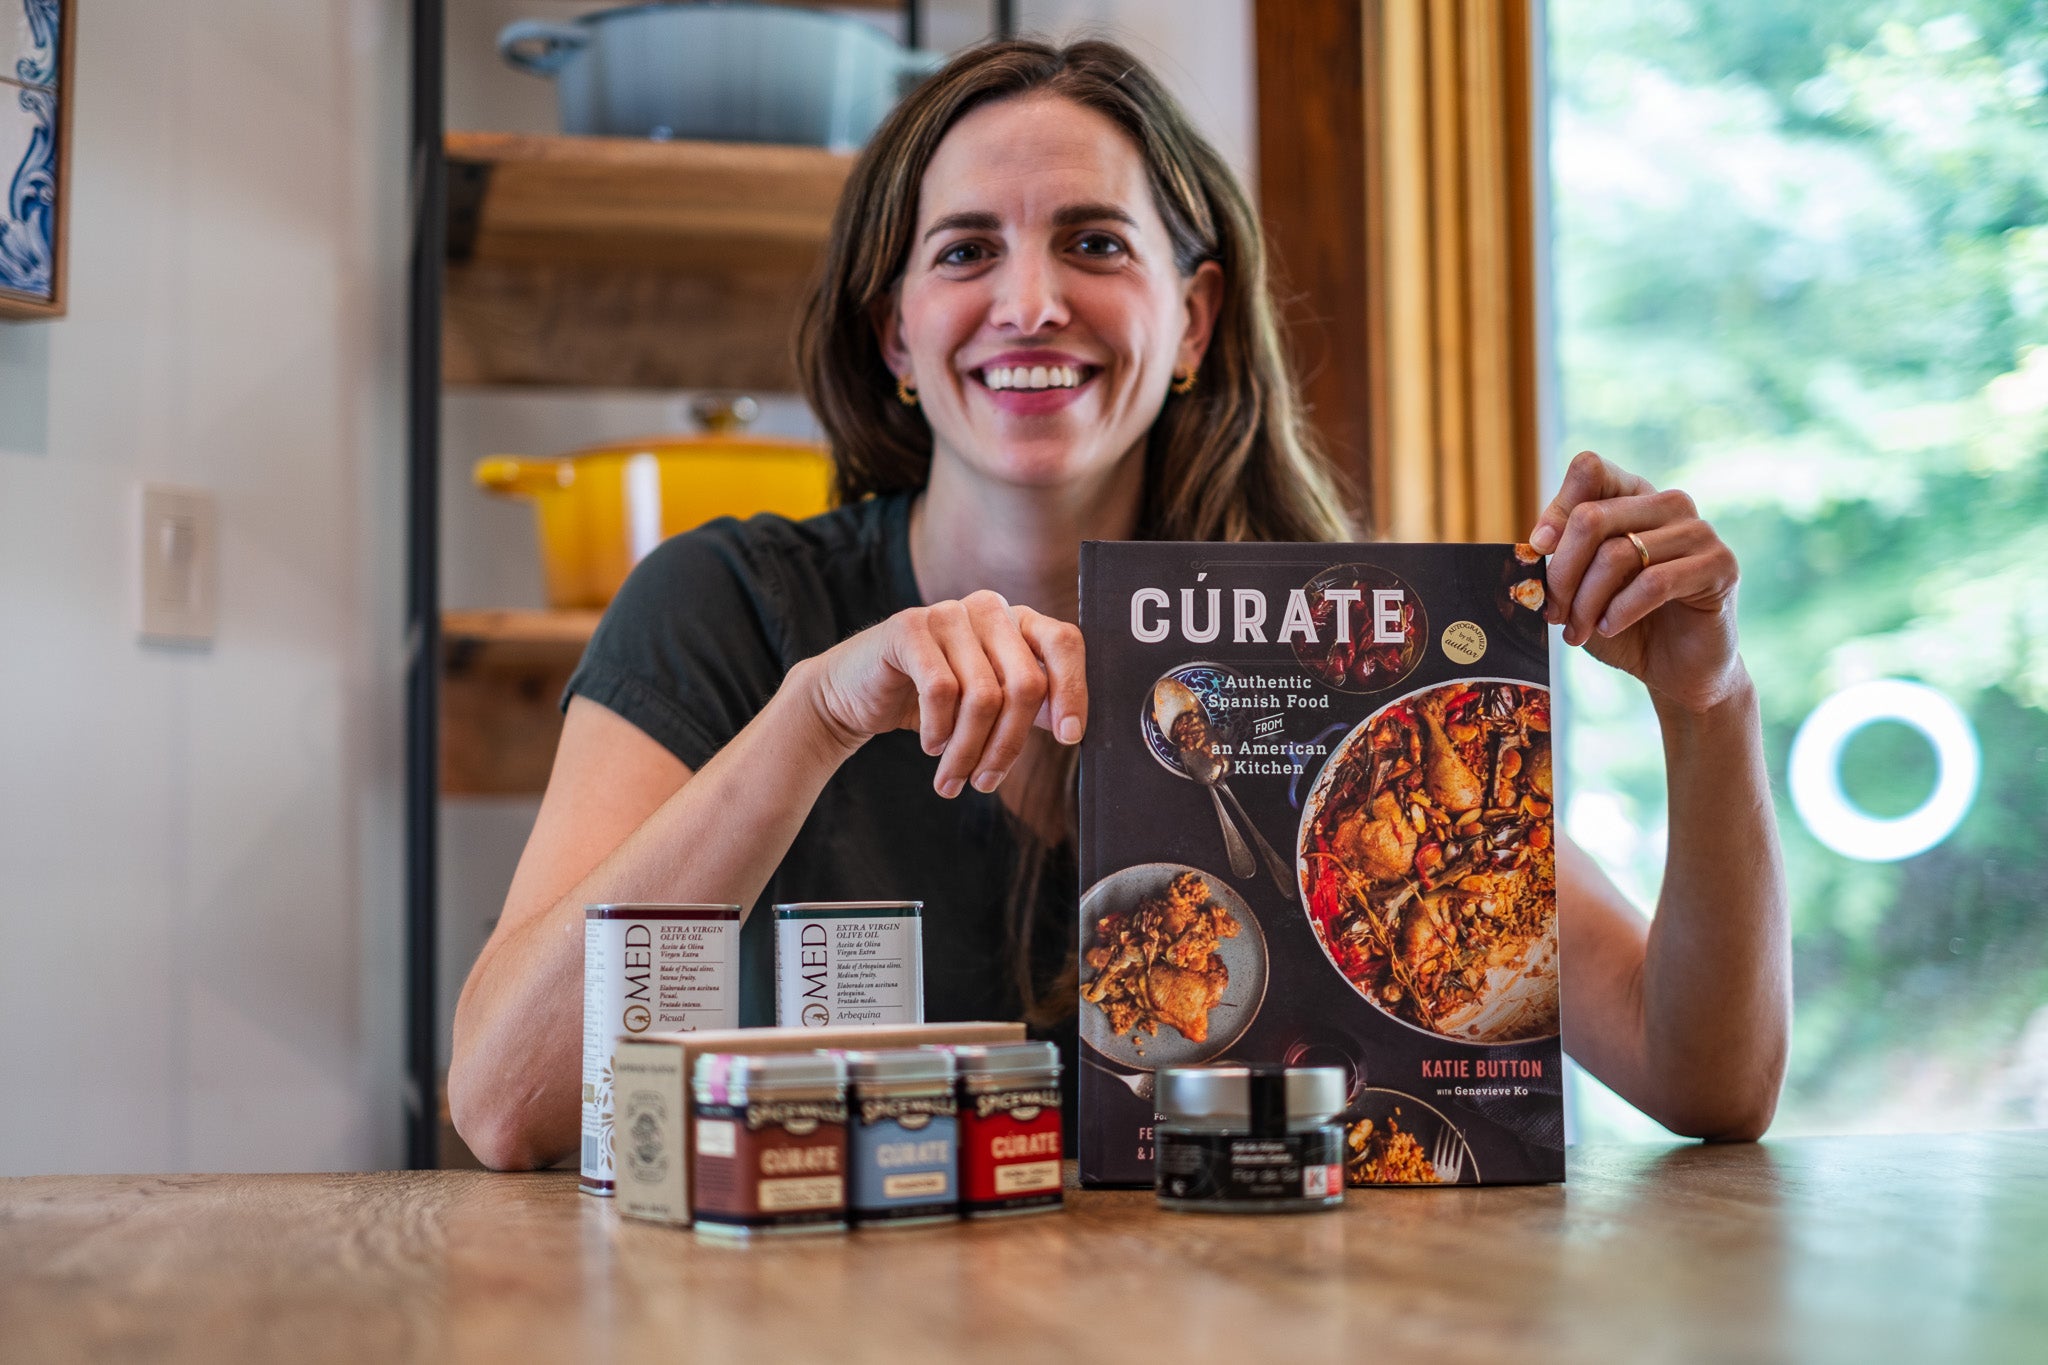 The Ultimate Cúrate Cookbook Kit by Katie Button